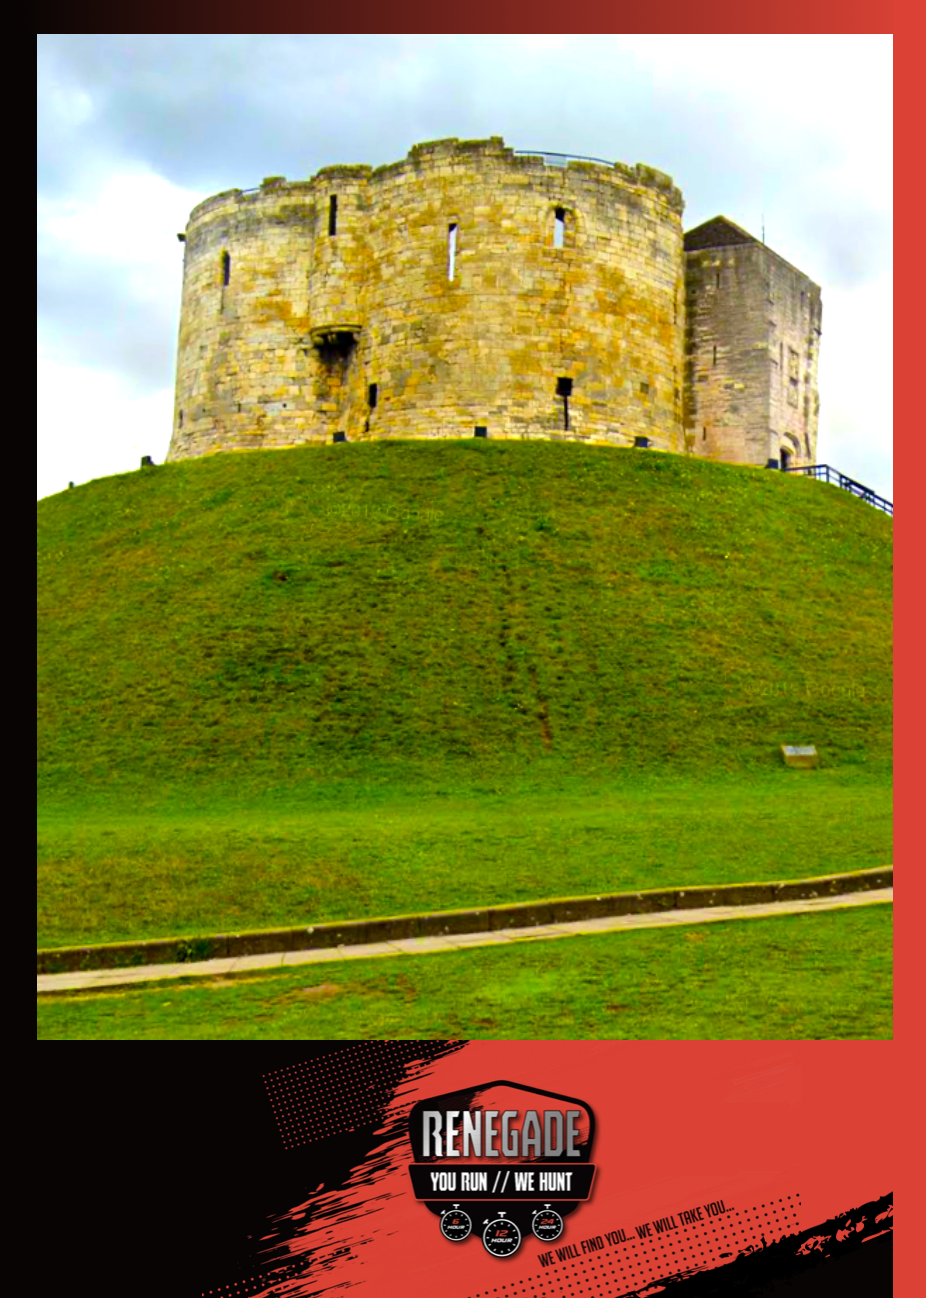 Cliffords Tower York, runAble, Renegade, The Drop